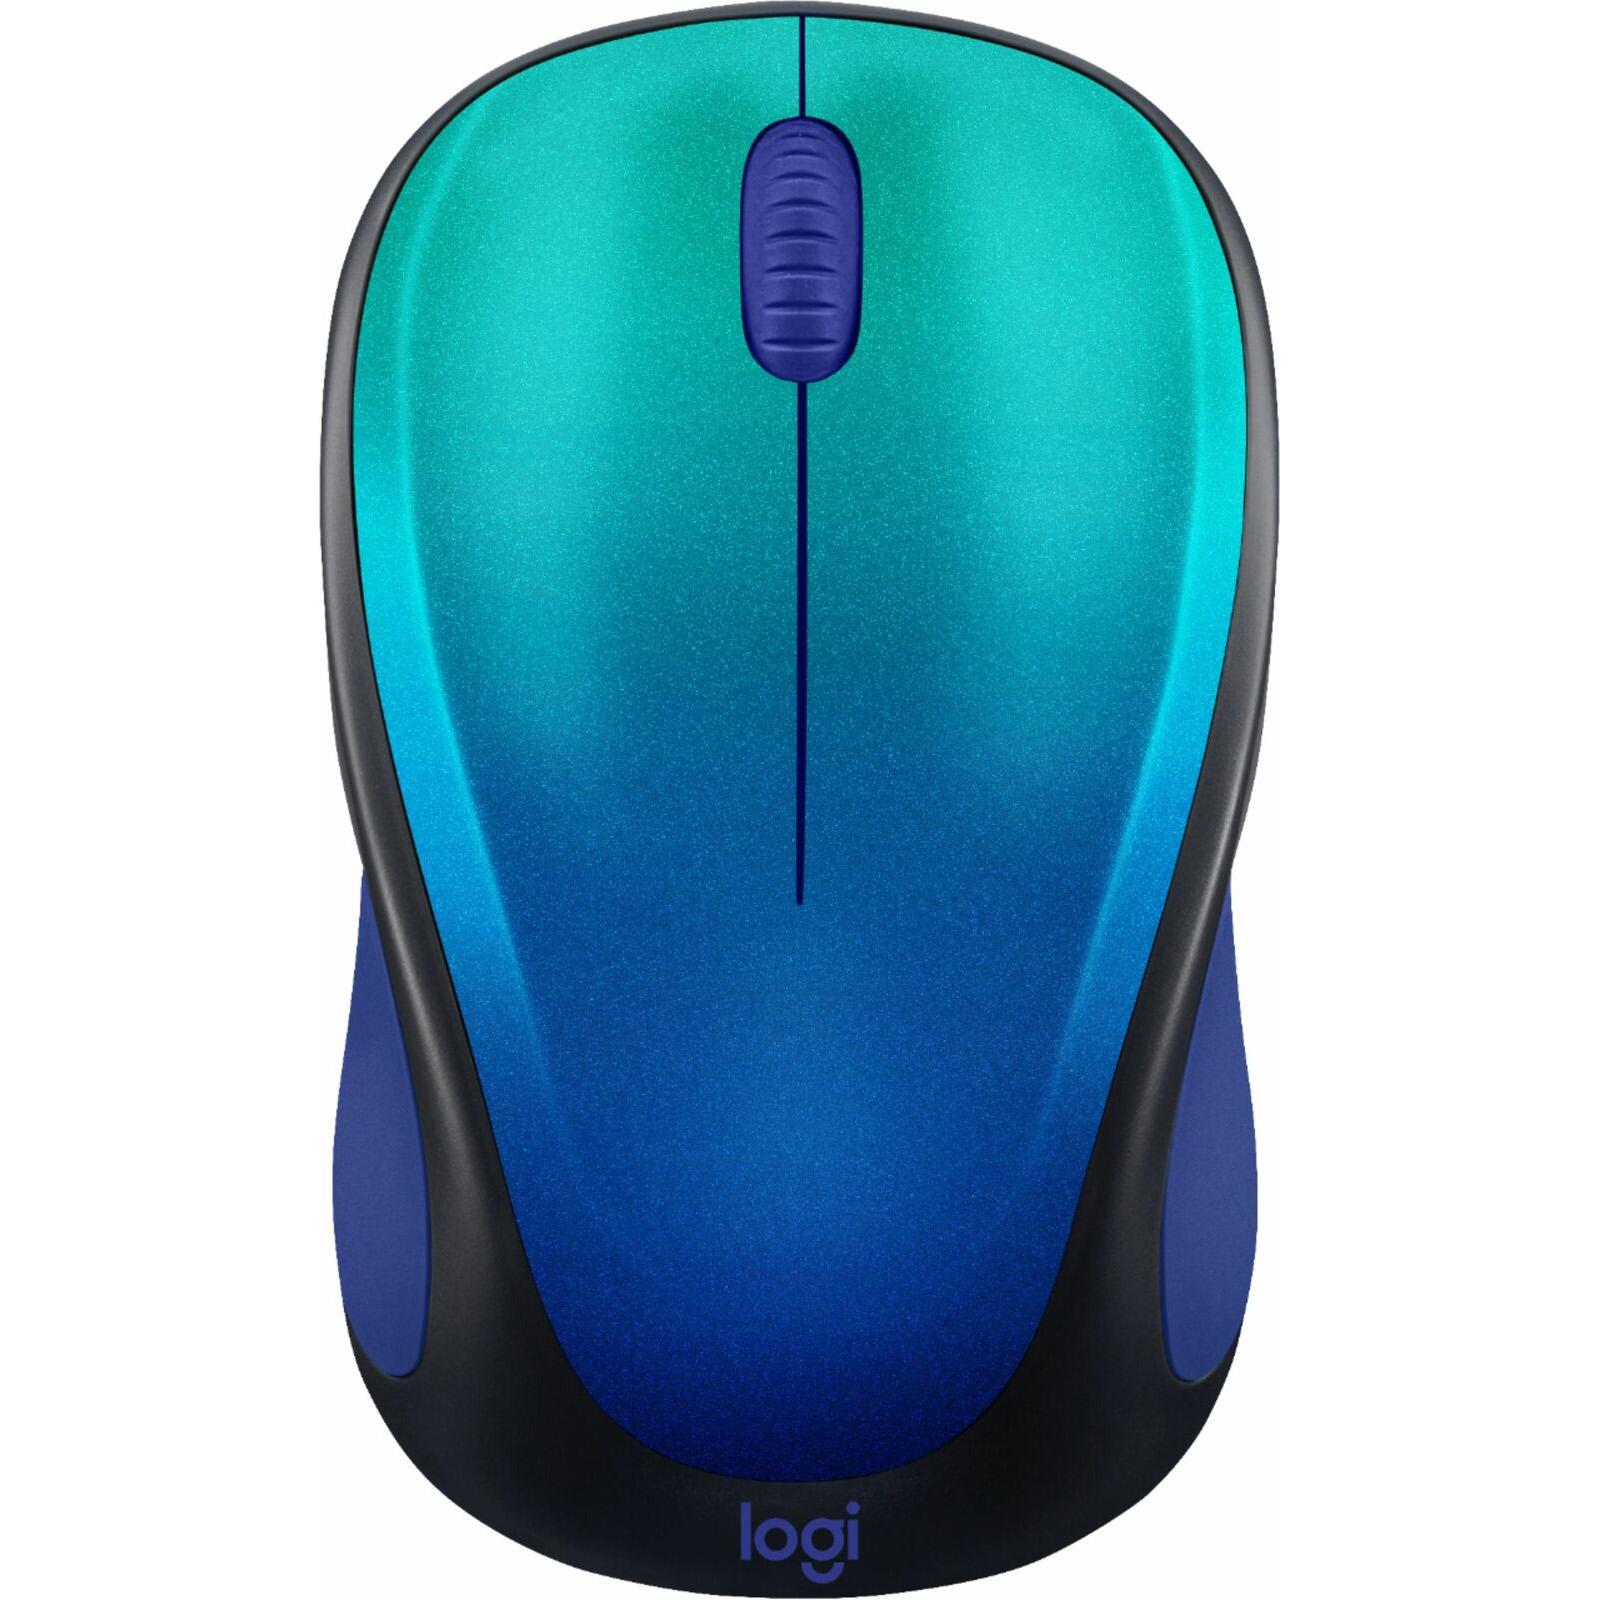 Logitech M317 Wireless Ambidextrous Mouse with USB Receiver for $9.99 Shipped